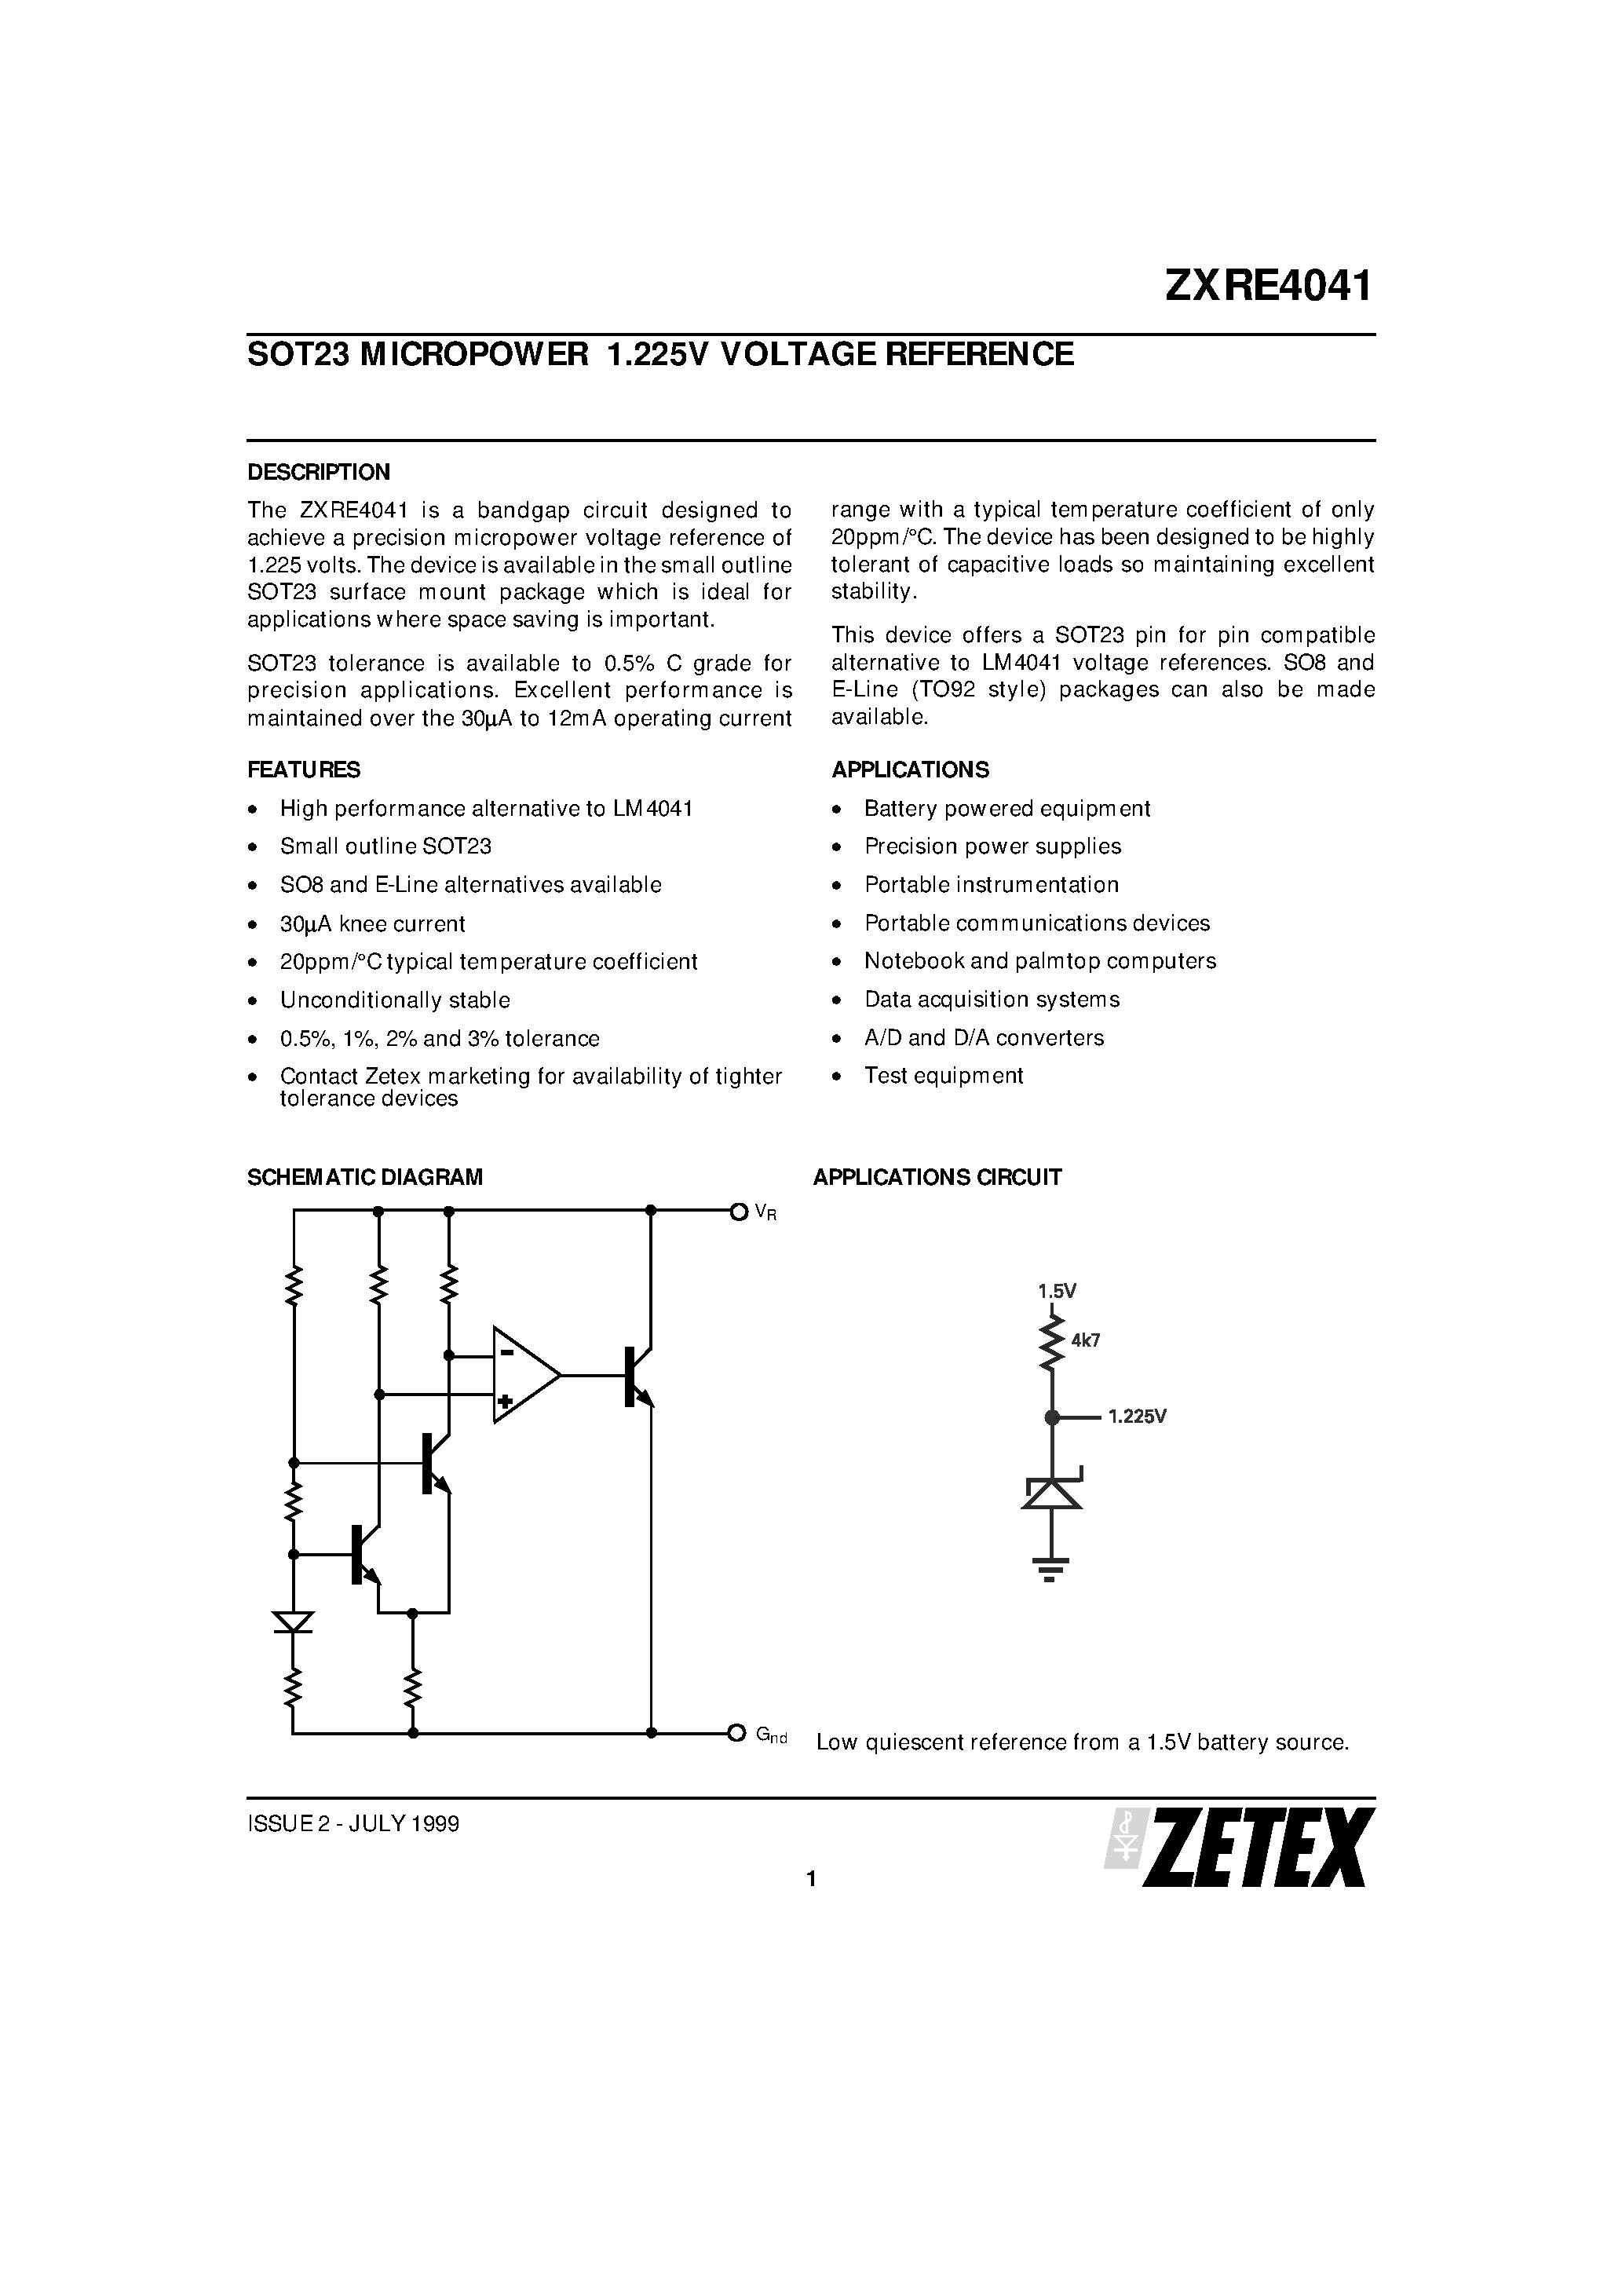 Datasheet ZXRE4041 - SOT23 MICROPOWER 1.225V VOLTAGE REFERENCE page 1